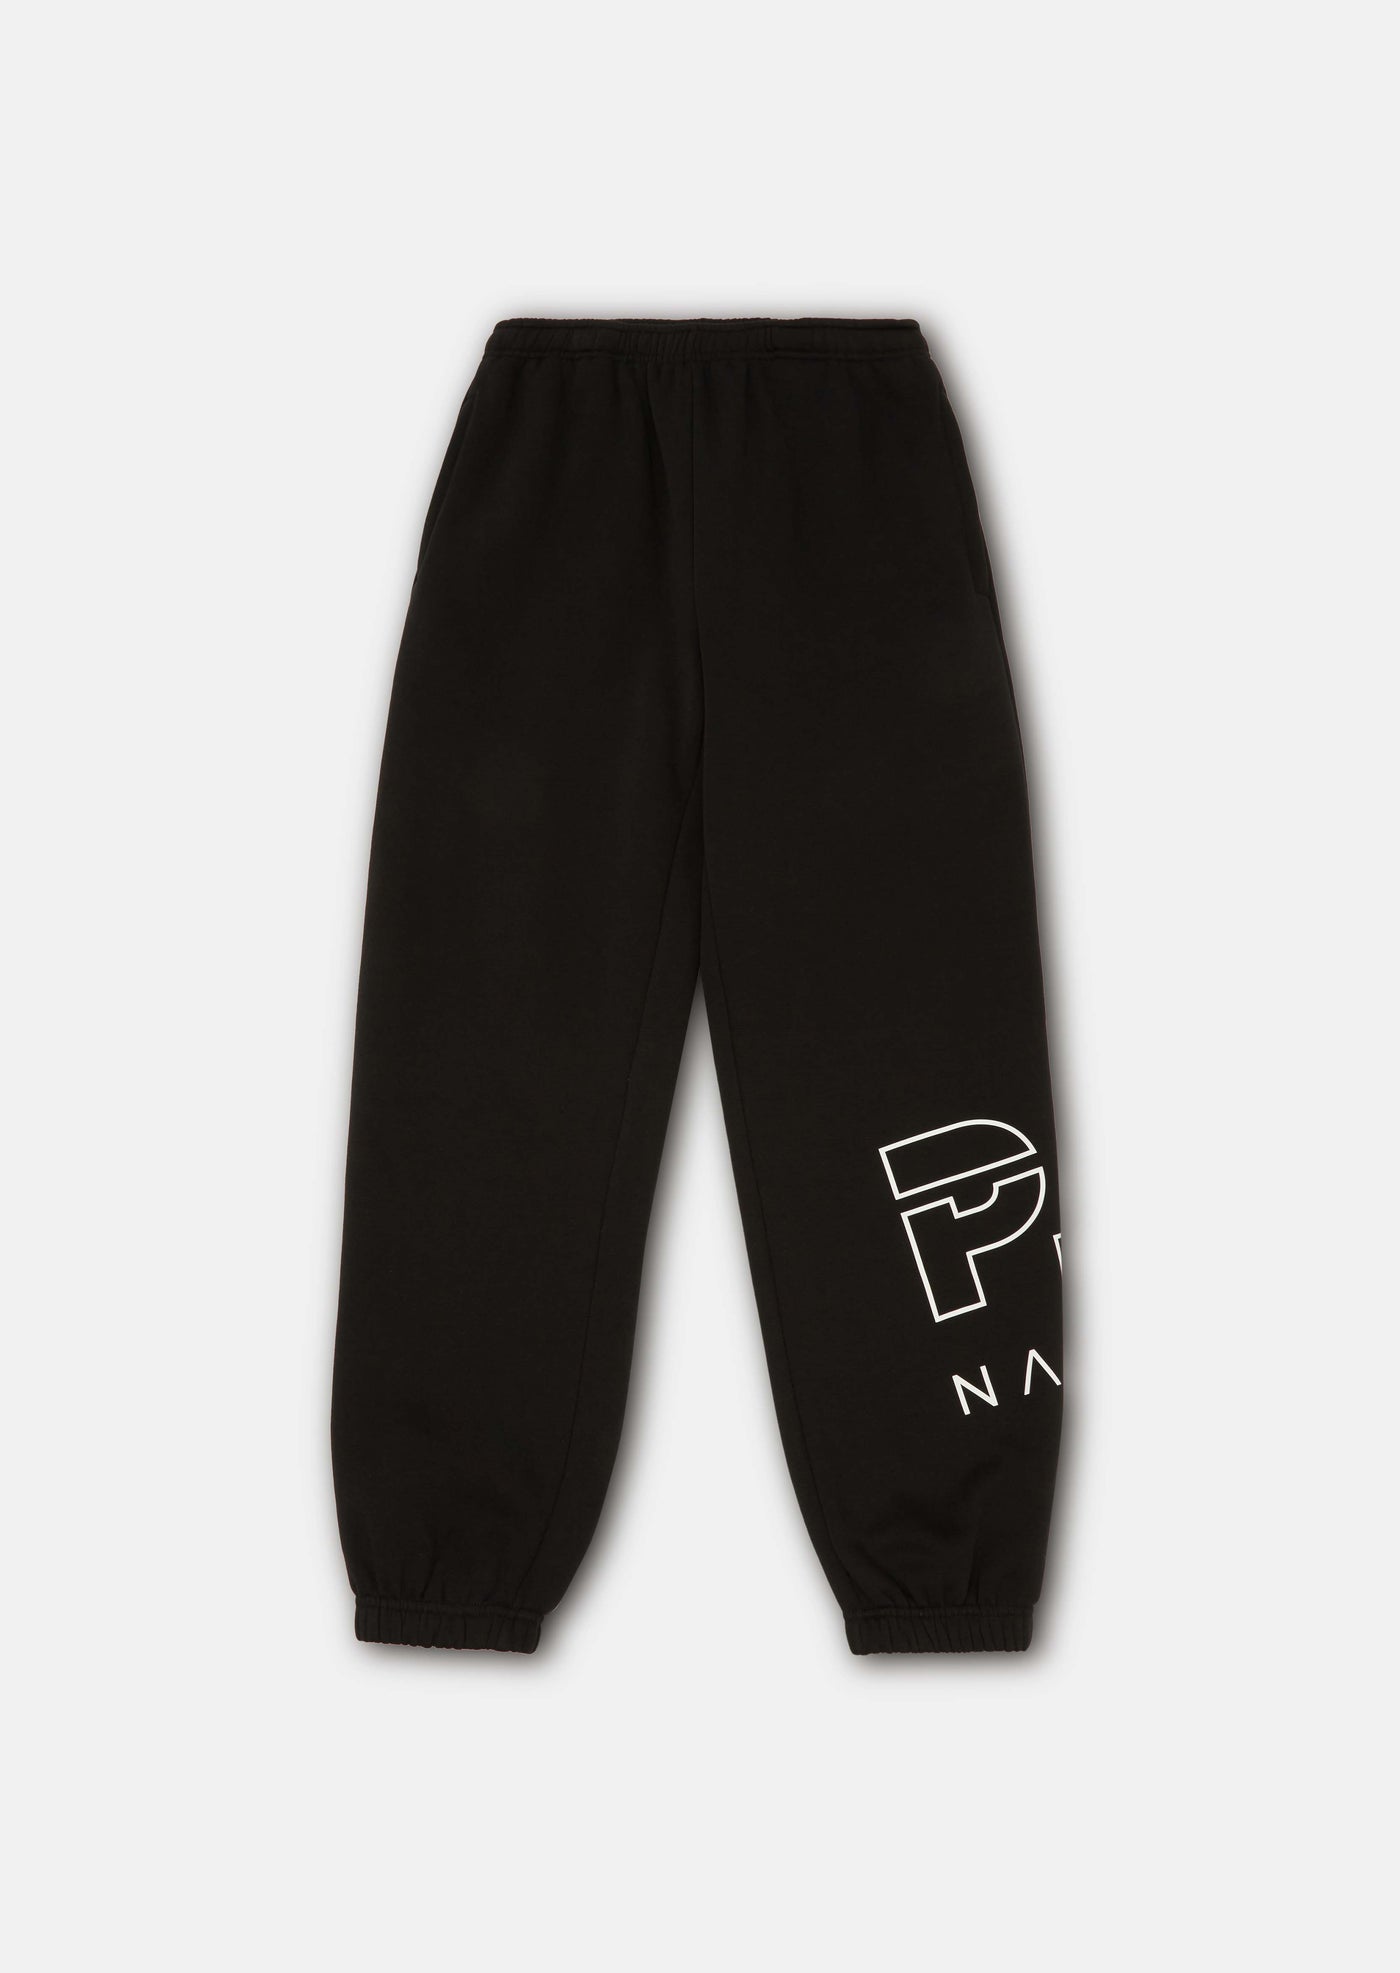 THE ORIGINAL TRACKPANT IN BLACK